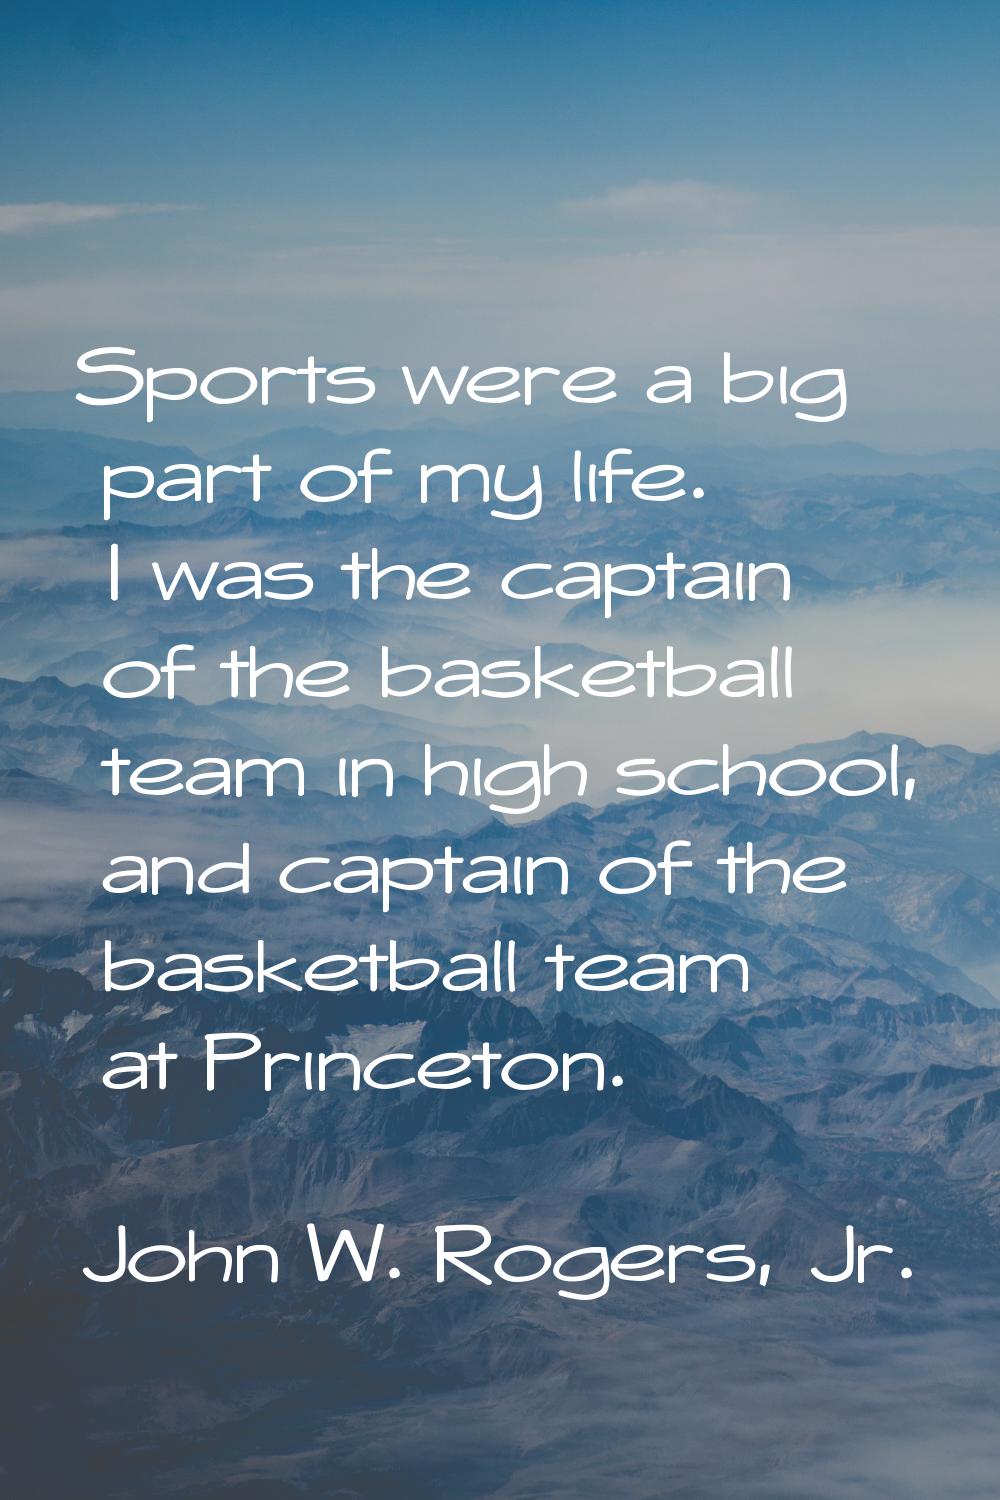 Sports were a big part of my life. I was the captain of the basketball team in high school, and cap